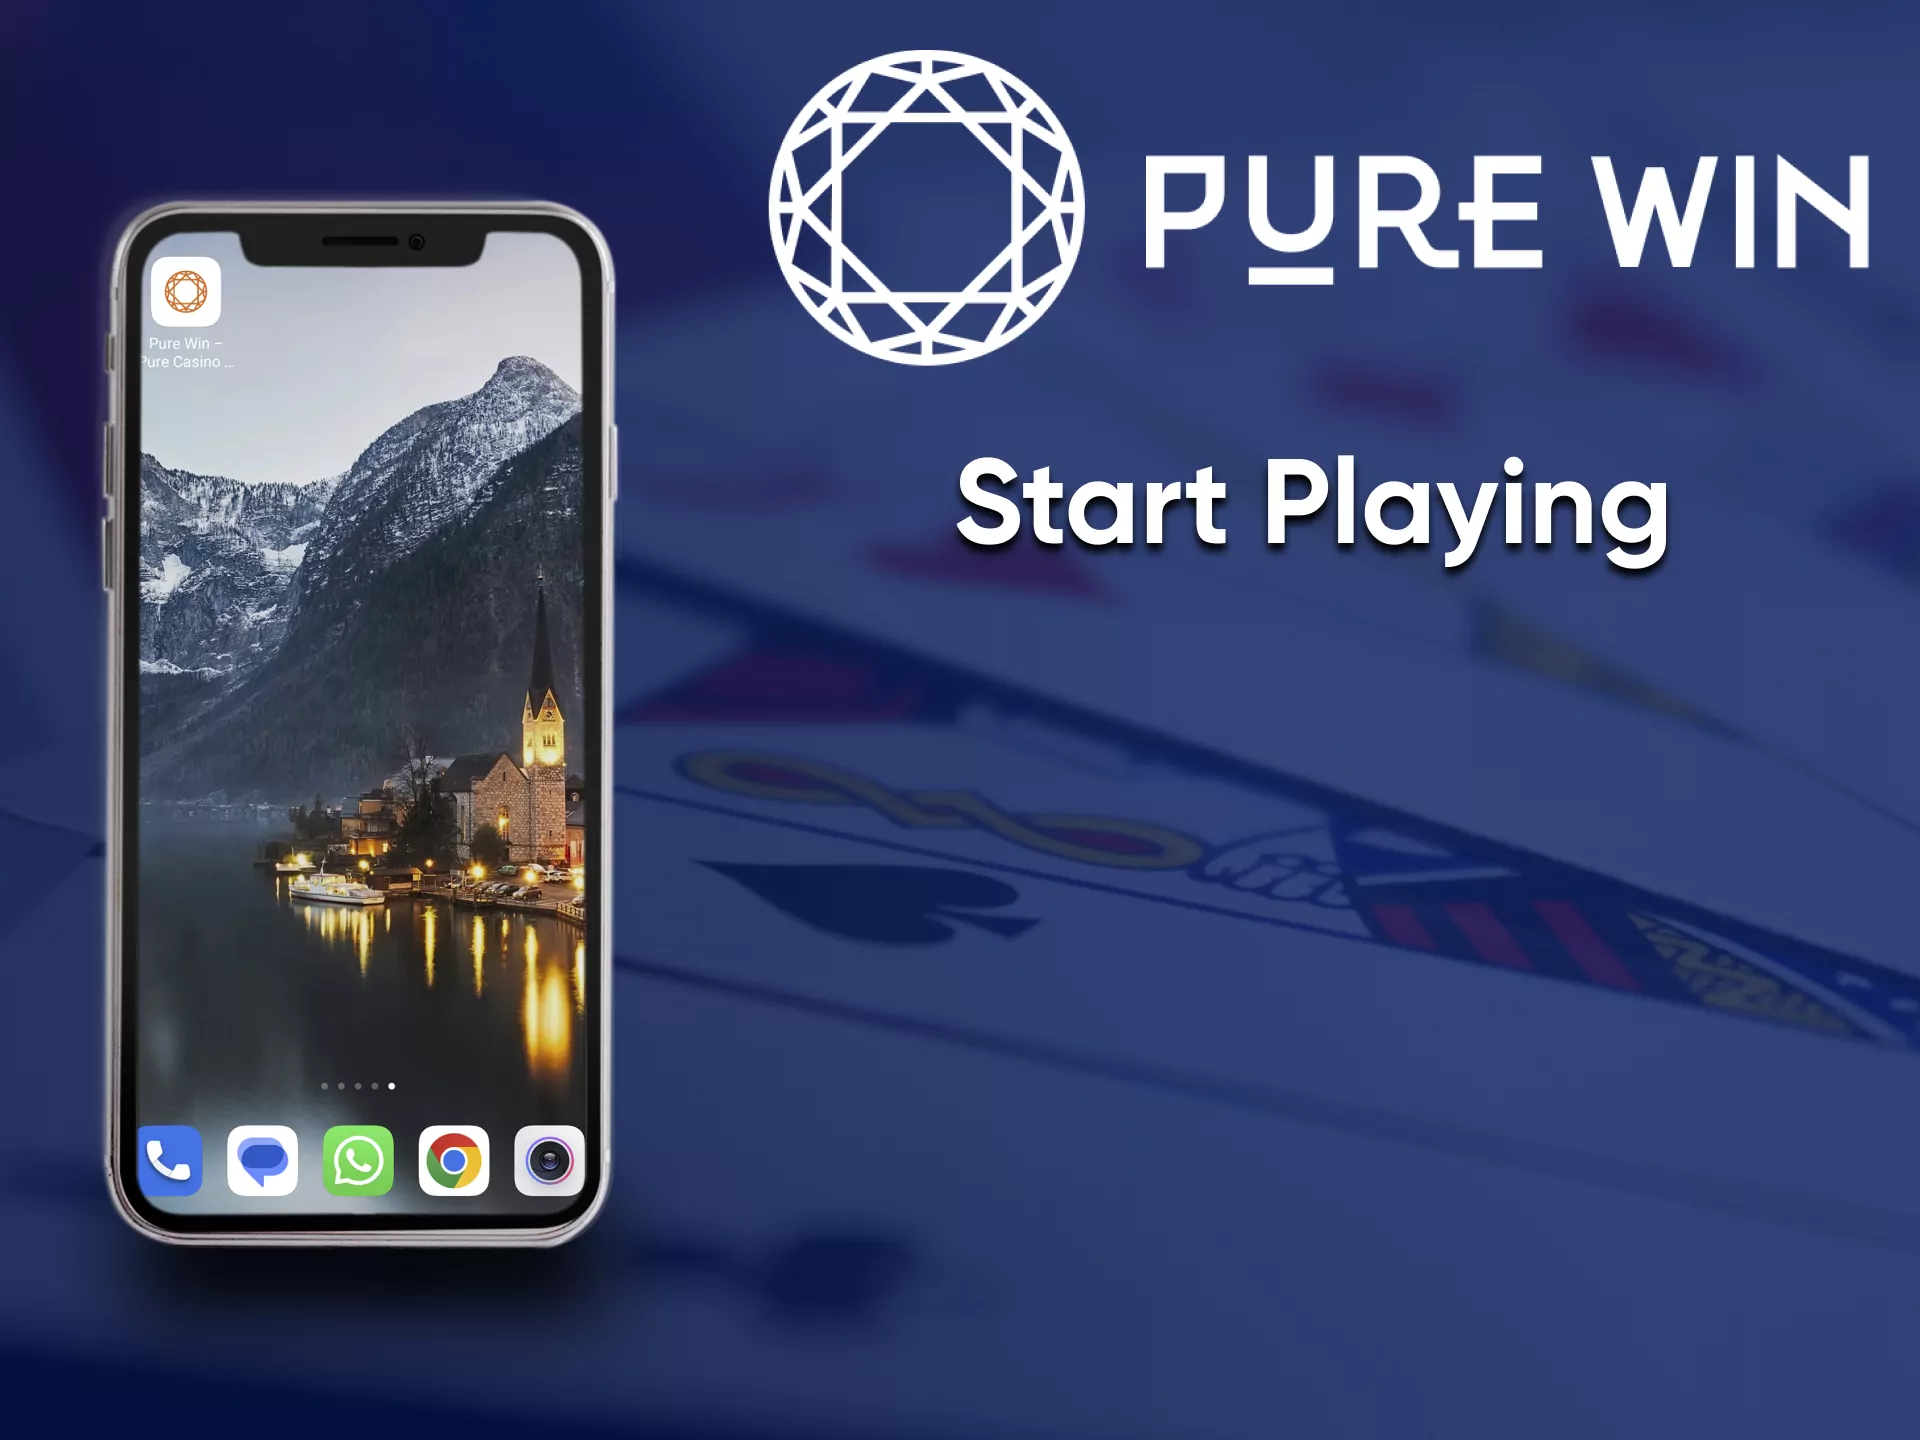 Start playing at the casino with Pure Win.